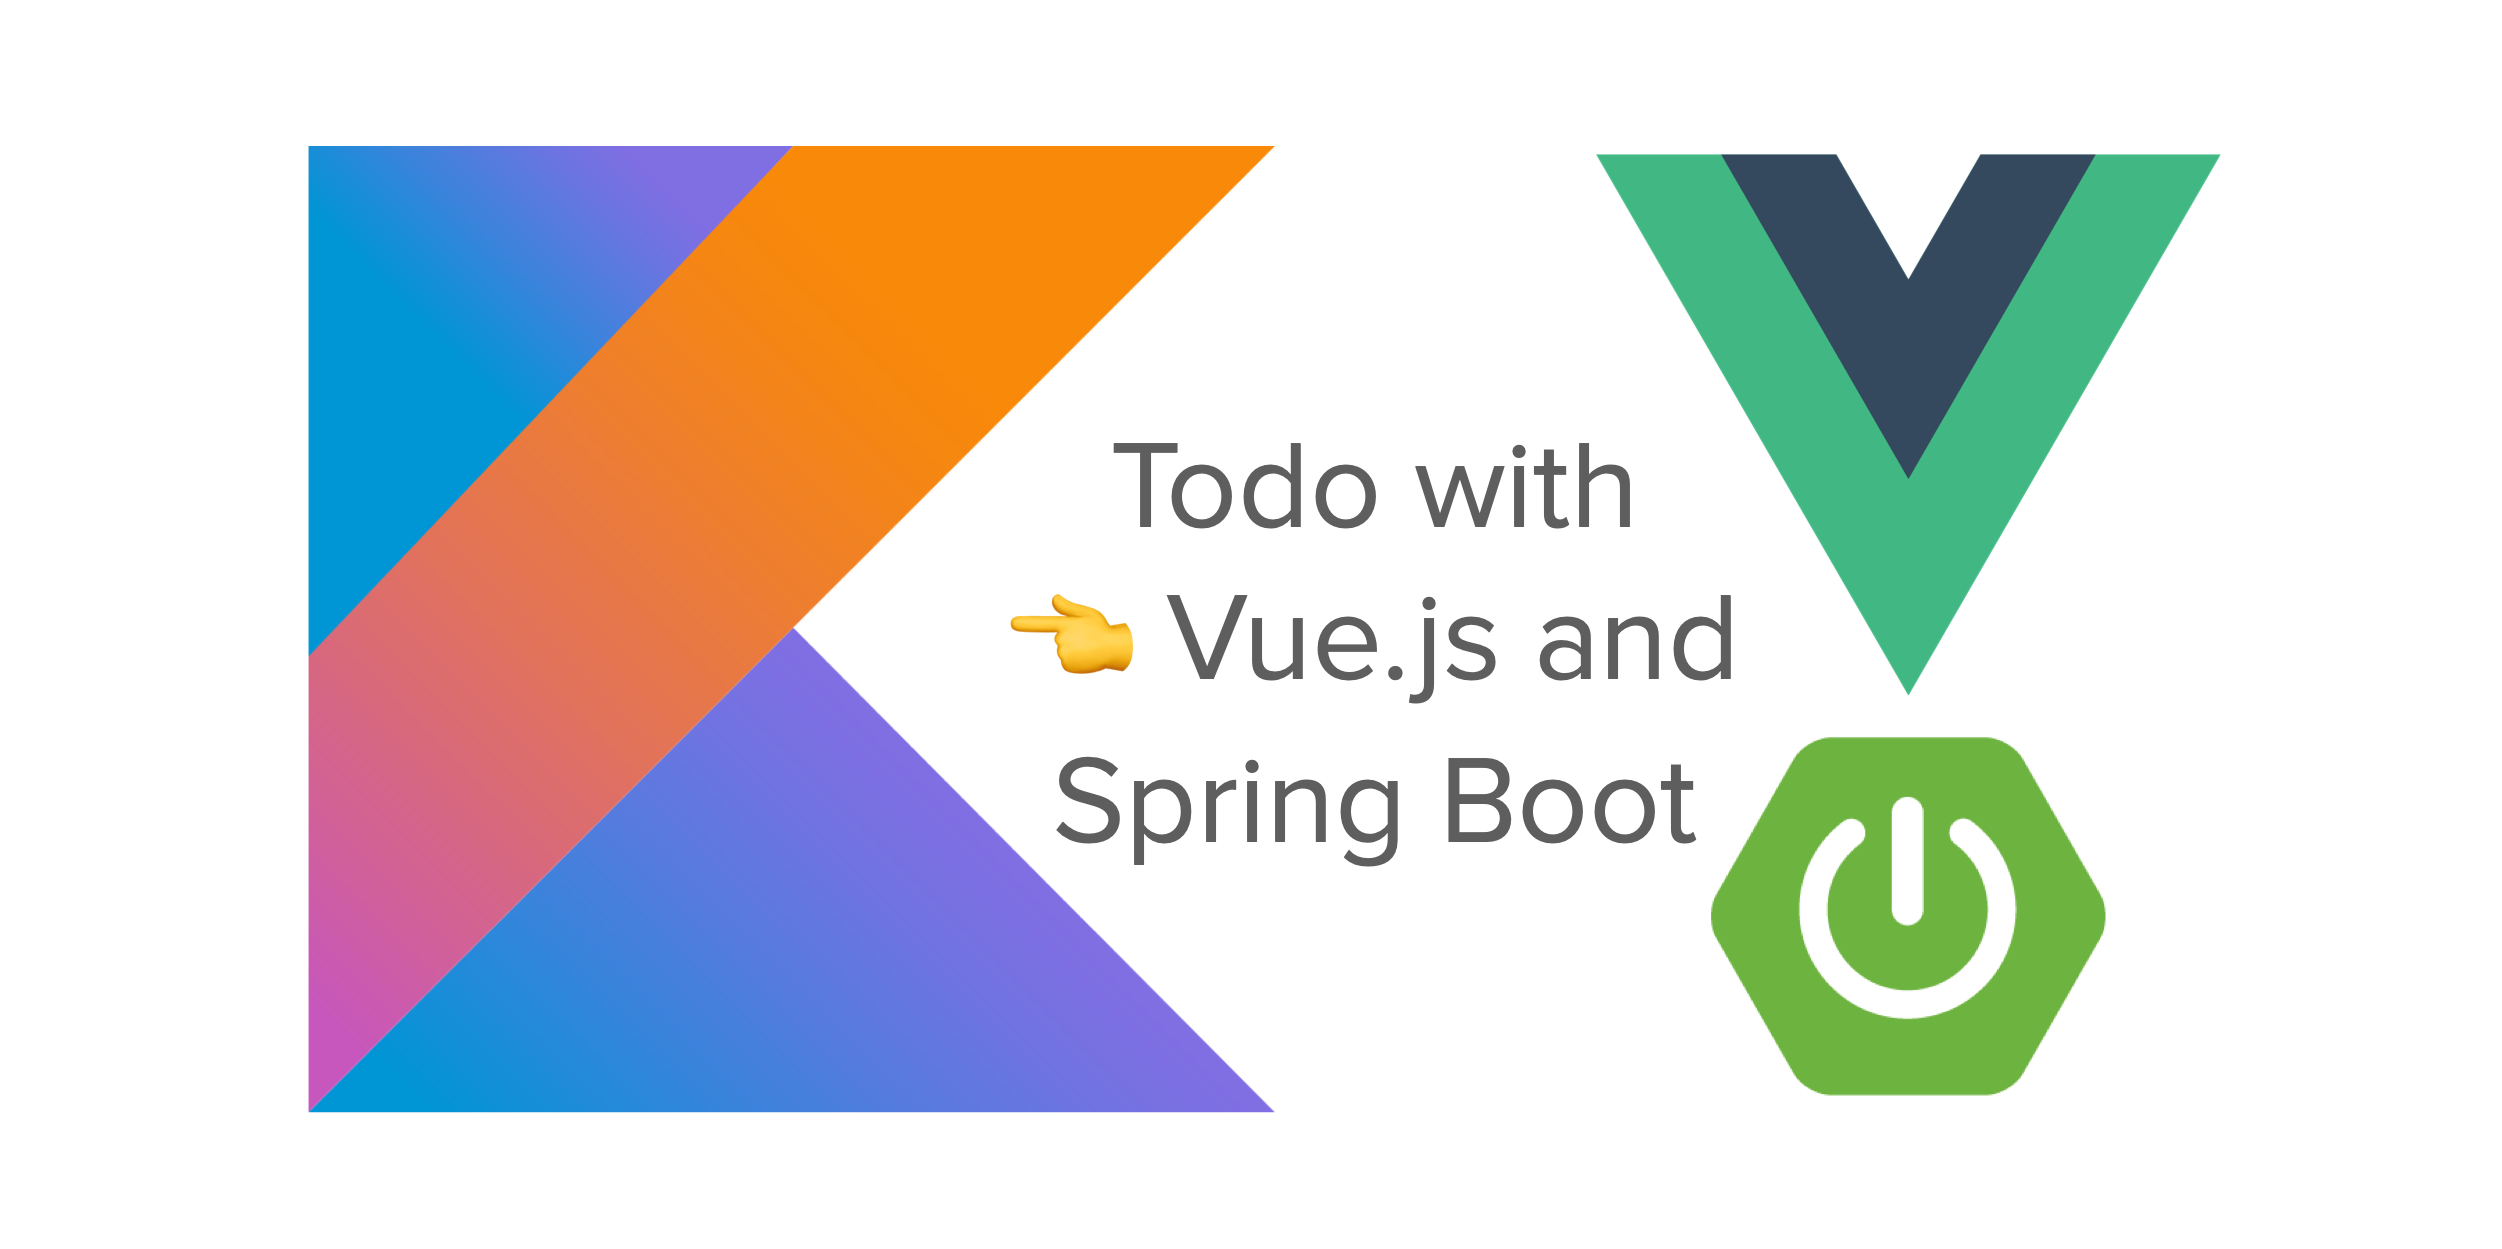 Build a CRUD App with Vue.js, Spring Boot, and Kotlin